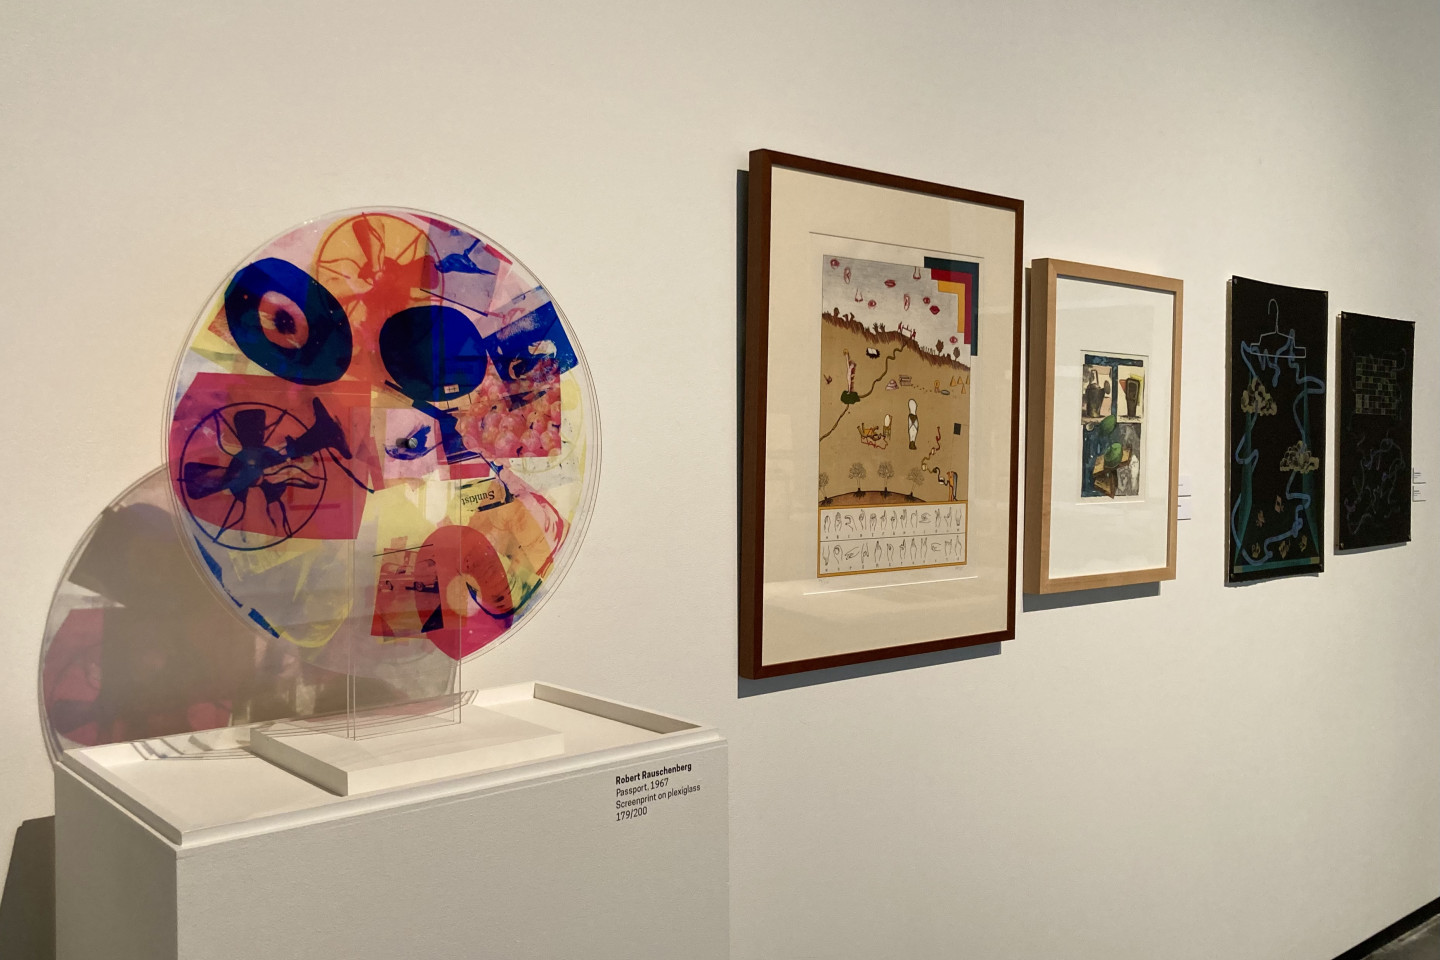 The new art exhibit that includes prints "Passport" by Robert Rauschenberg and "Historical Culture by Jan Voss.